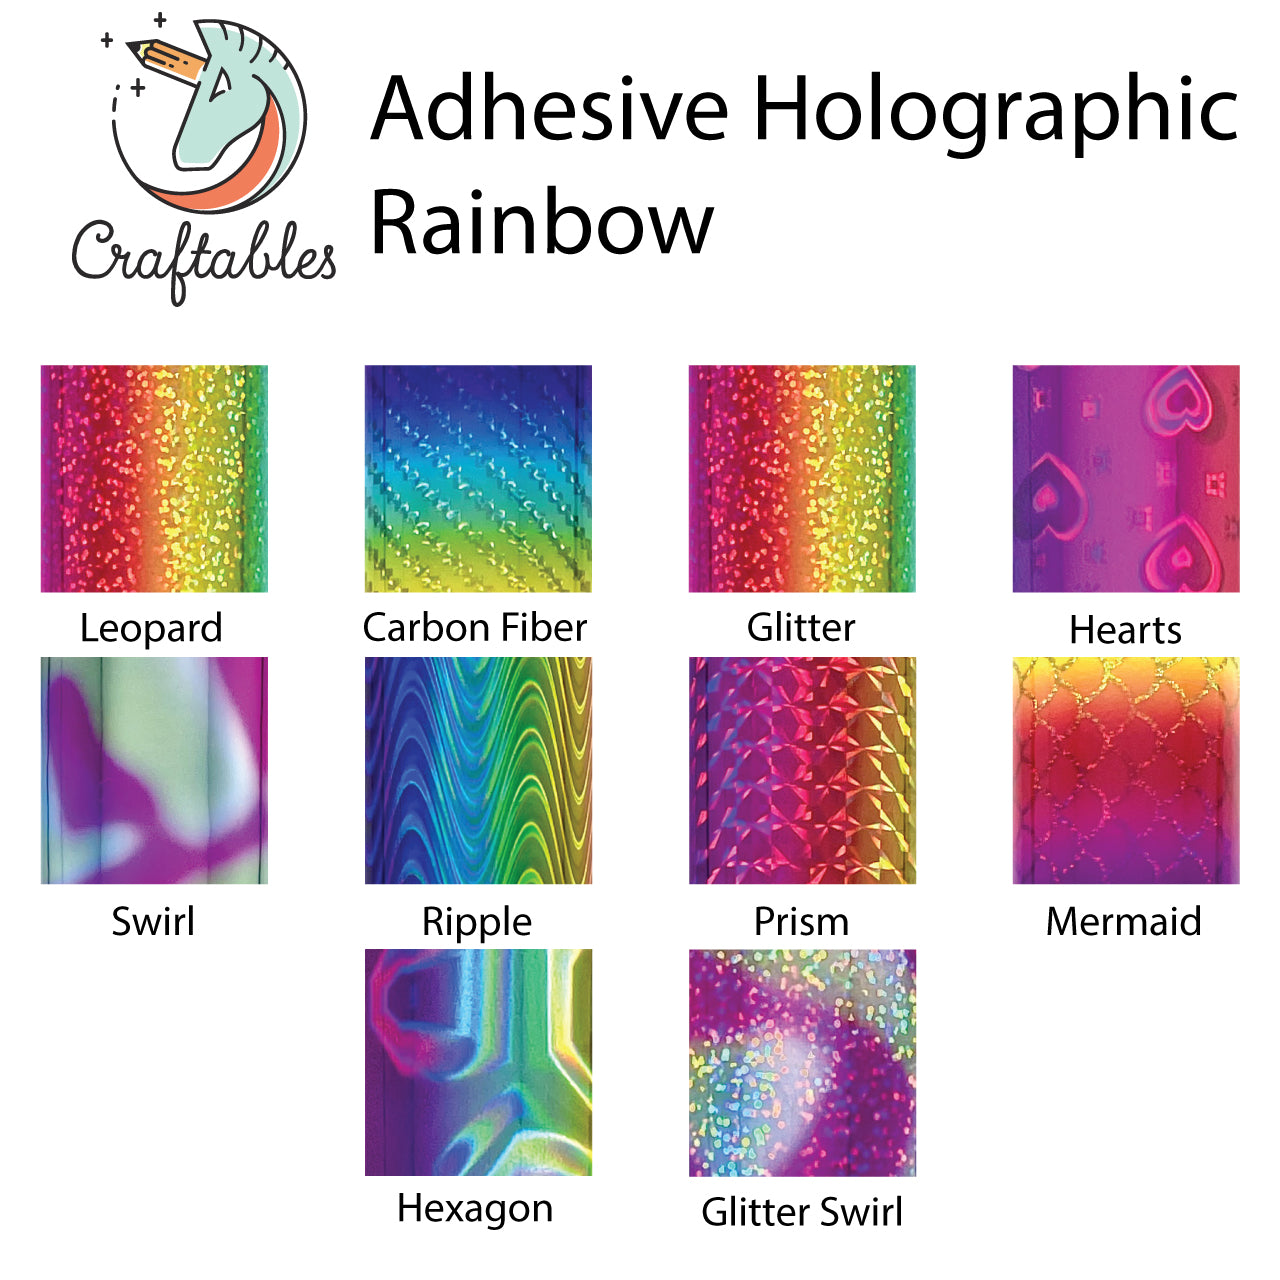 Hexagon Rainbow Holographic Adhesive Vinyl Sheets By Craftables